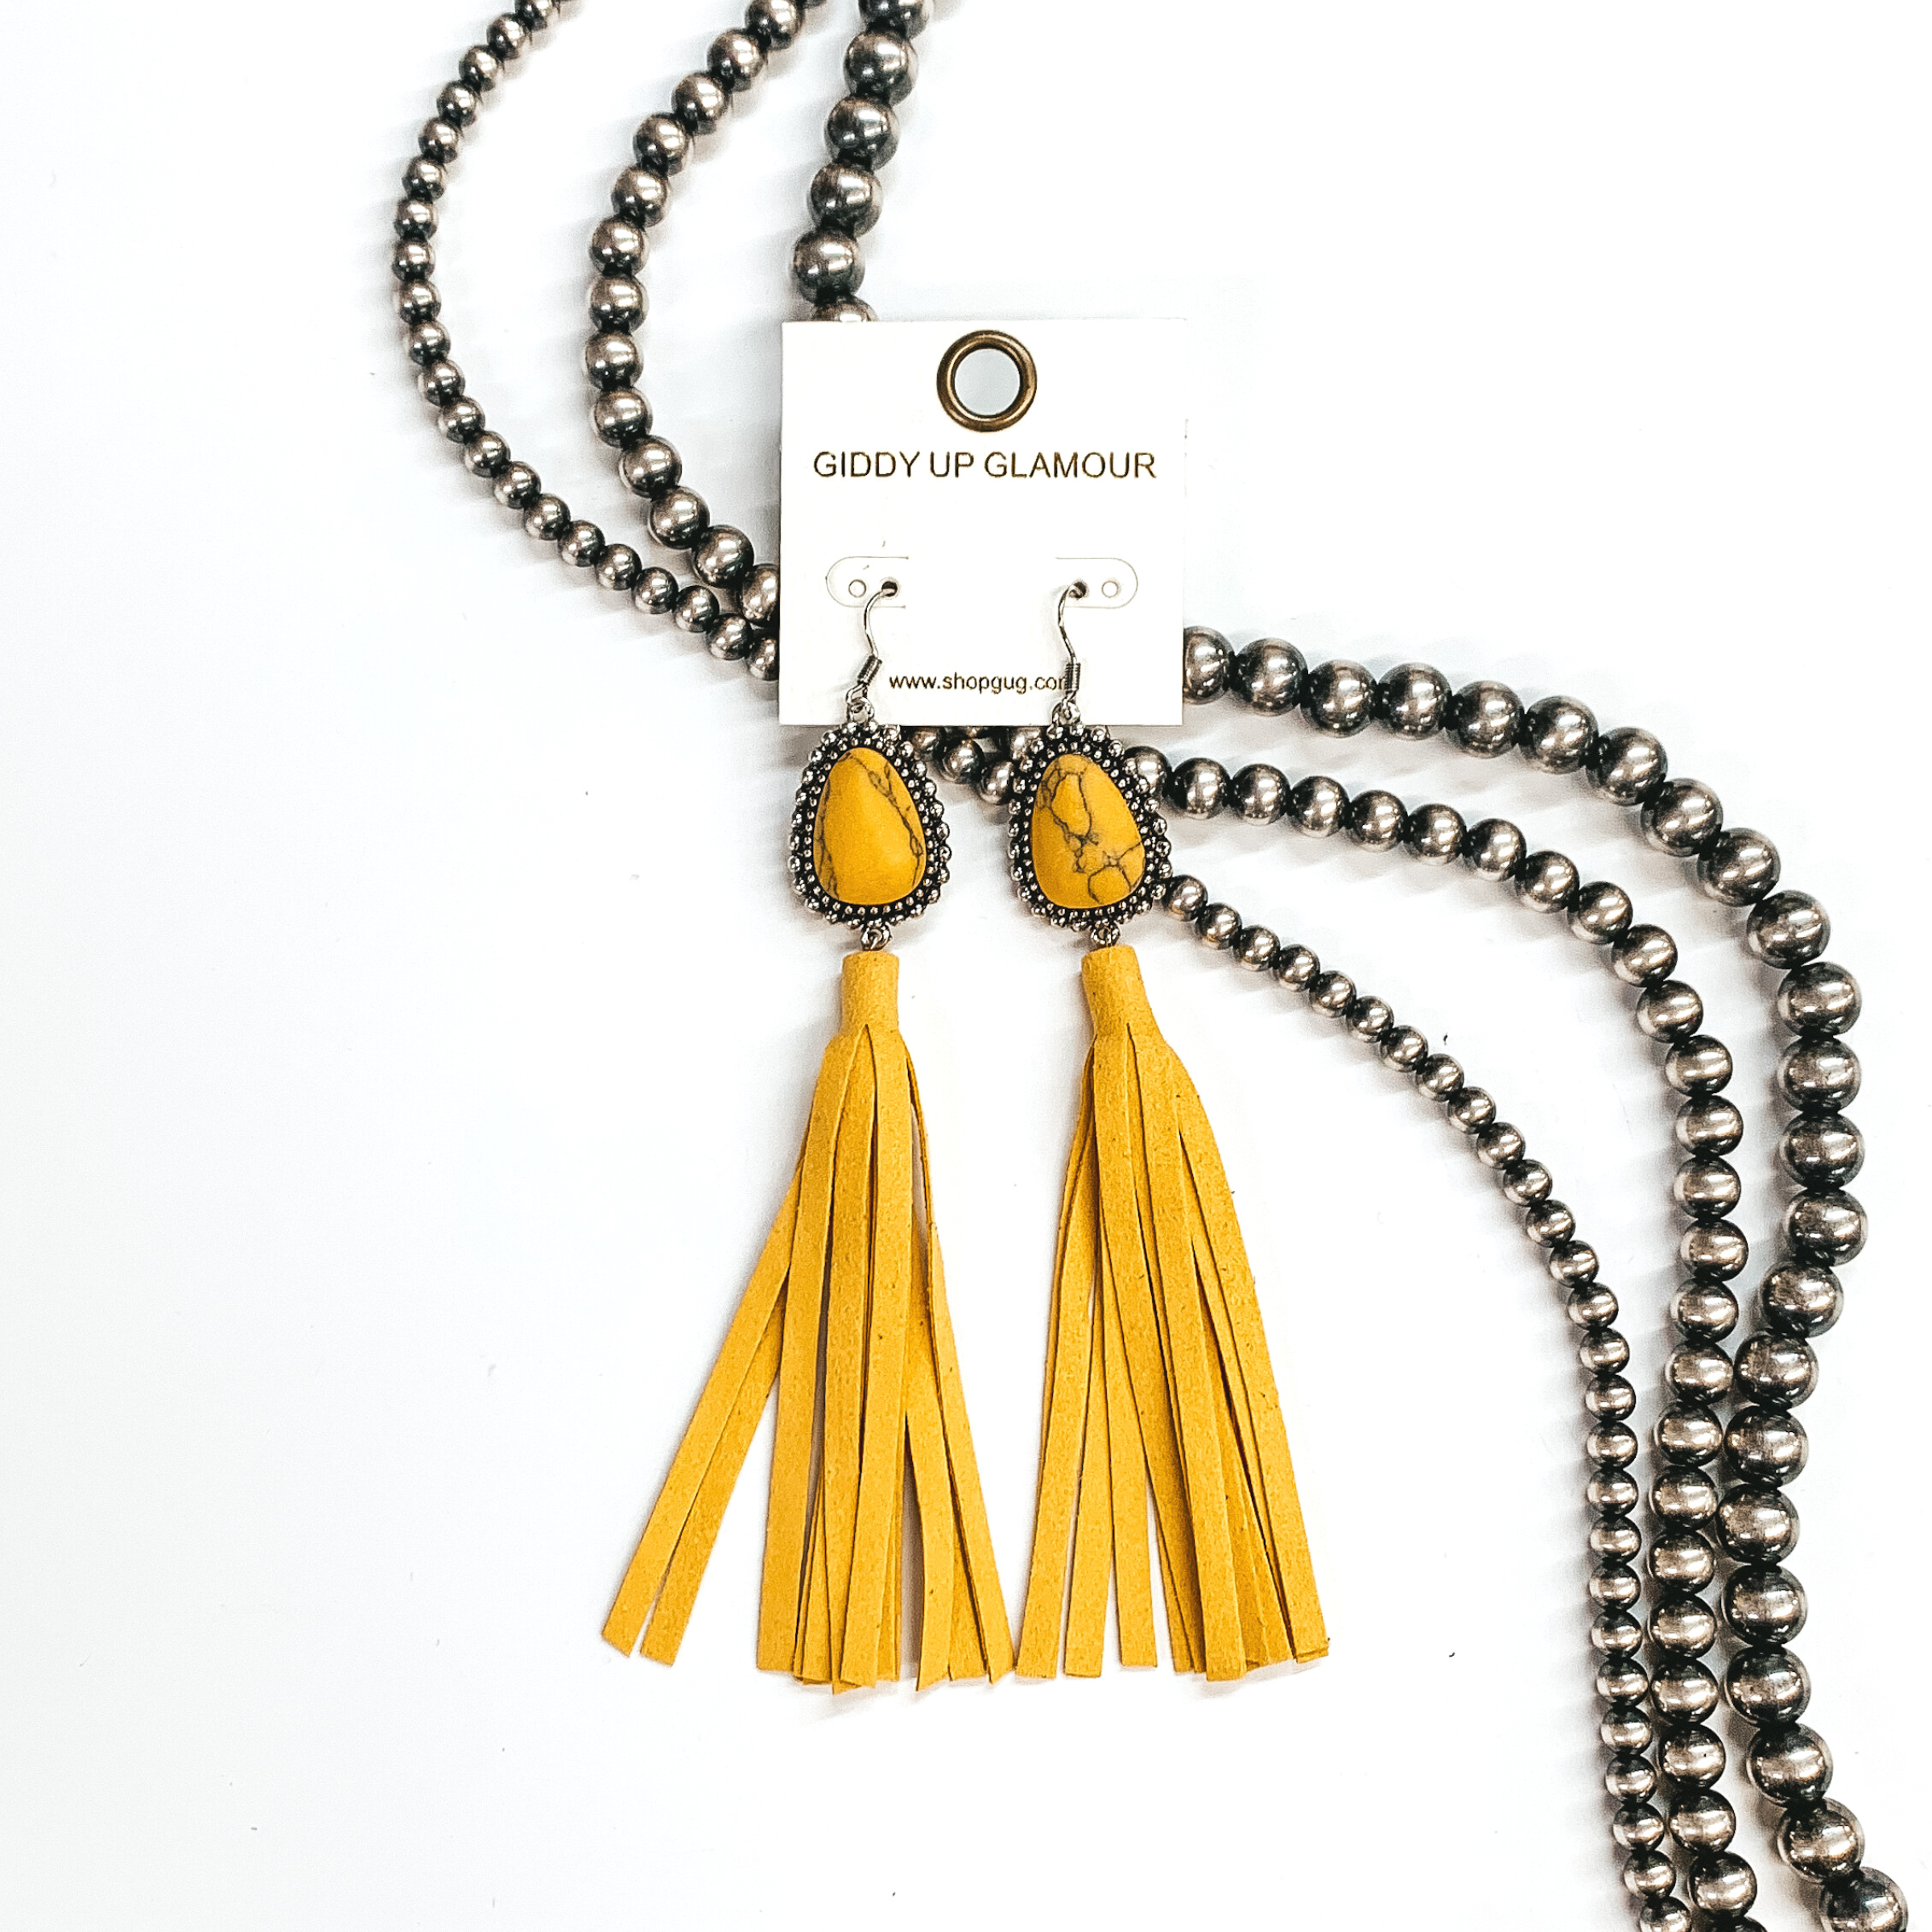 Yellow teardrop stone earrings in a silver setting with a faux leather  tassels in yellow. These earrings are taken on a white background and  Navajo pearls in the back as decor.